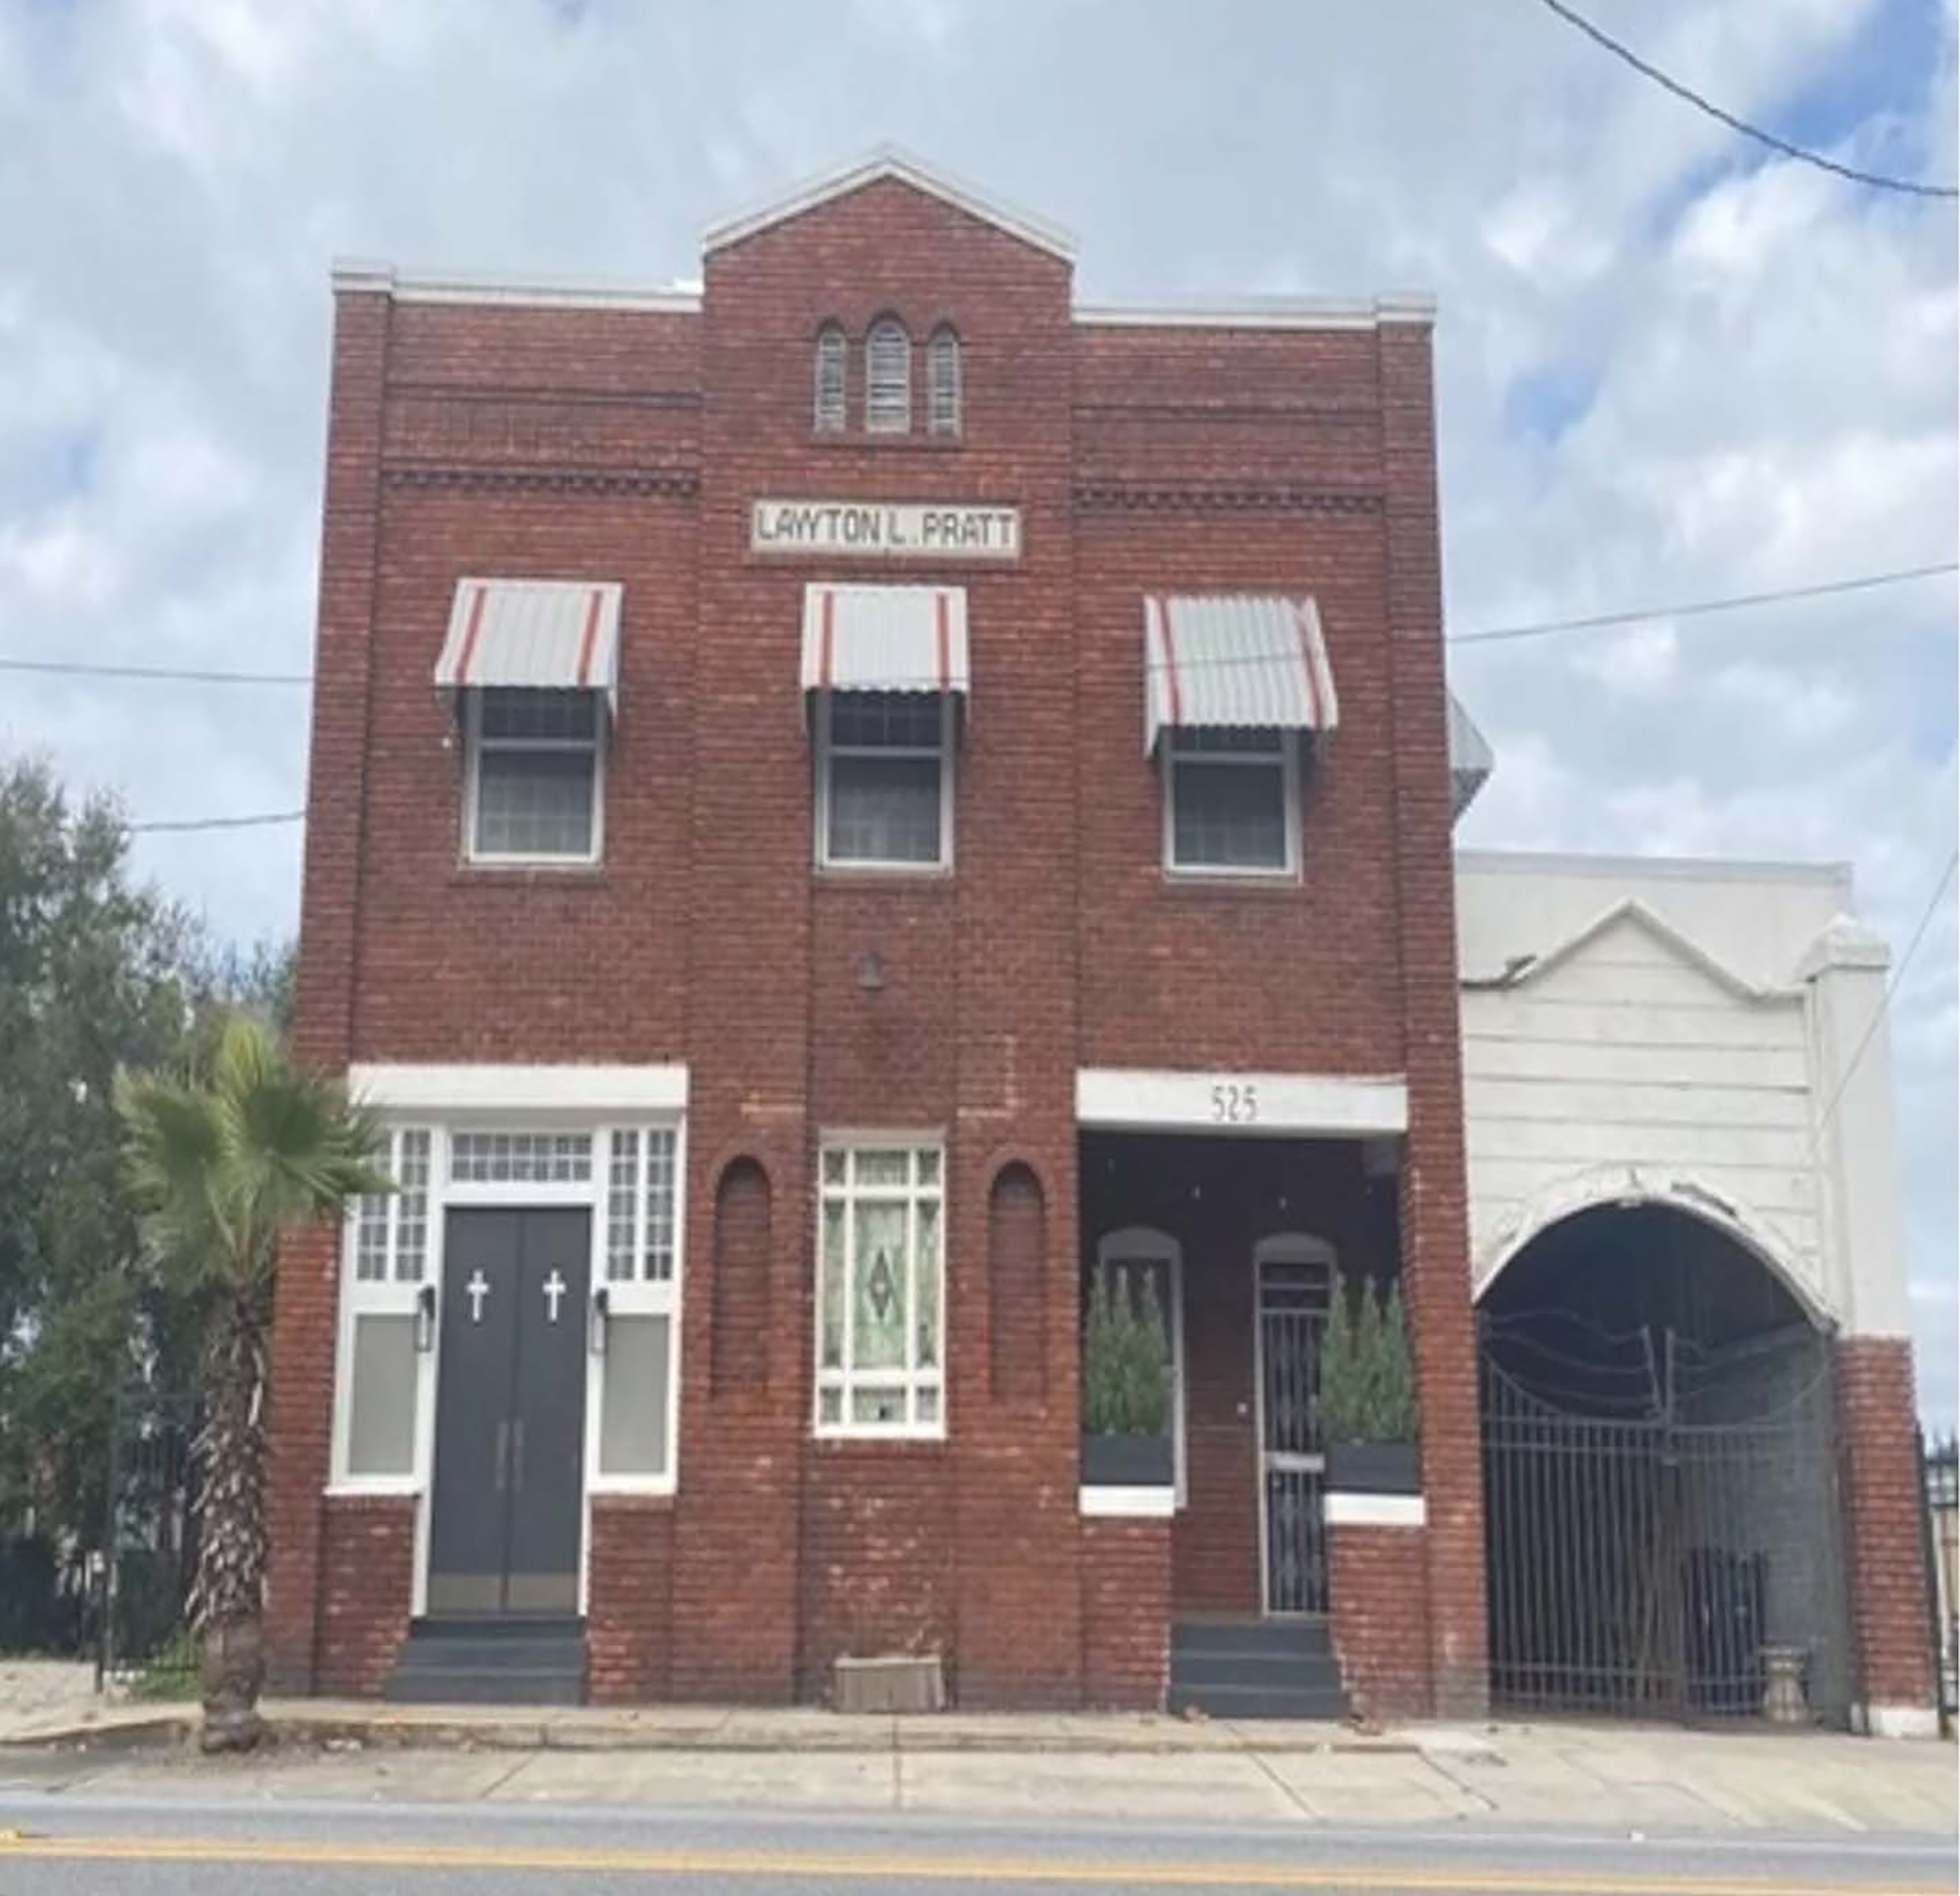 Duval County property records show the two-story building is 10,603 square feet.